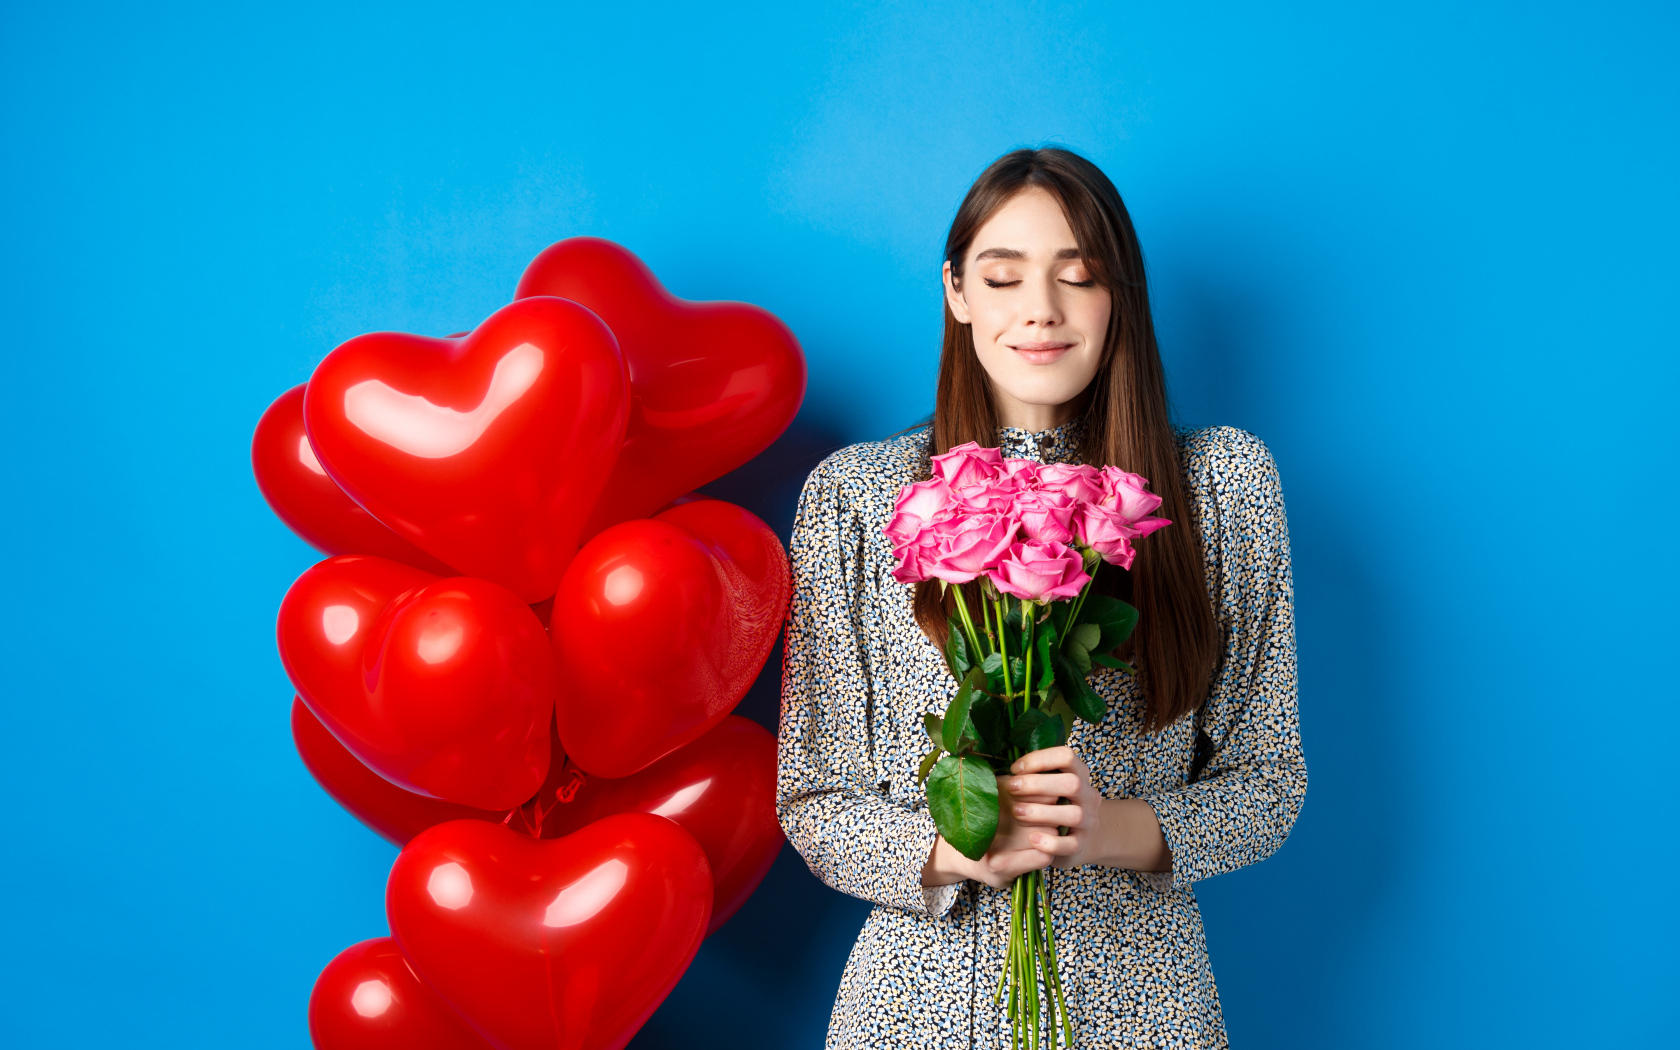 Girl with a bouquet of roses and balloons for Valentine's Day